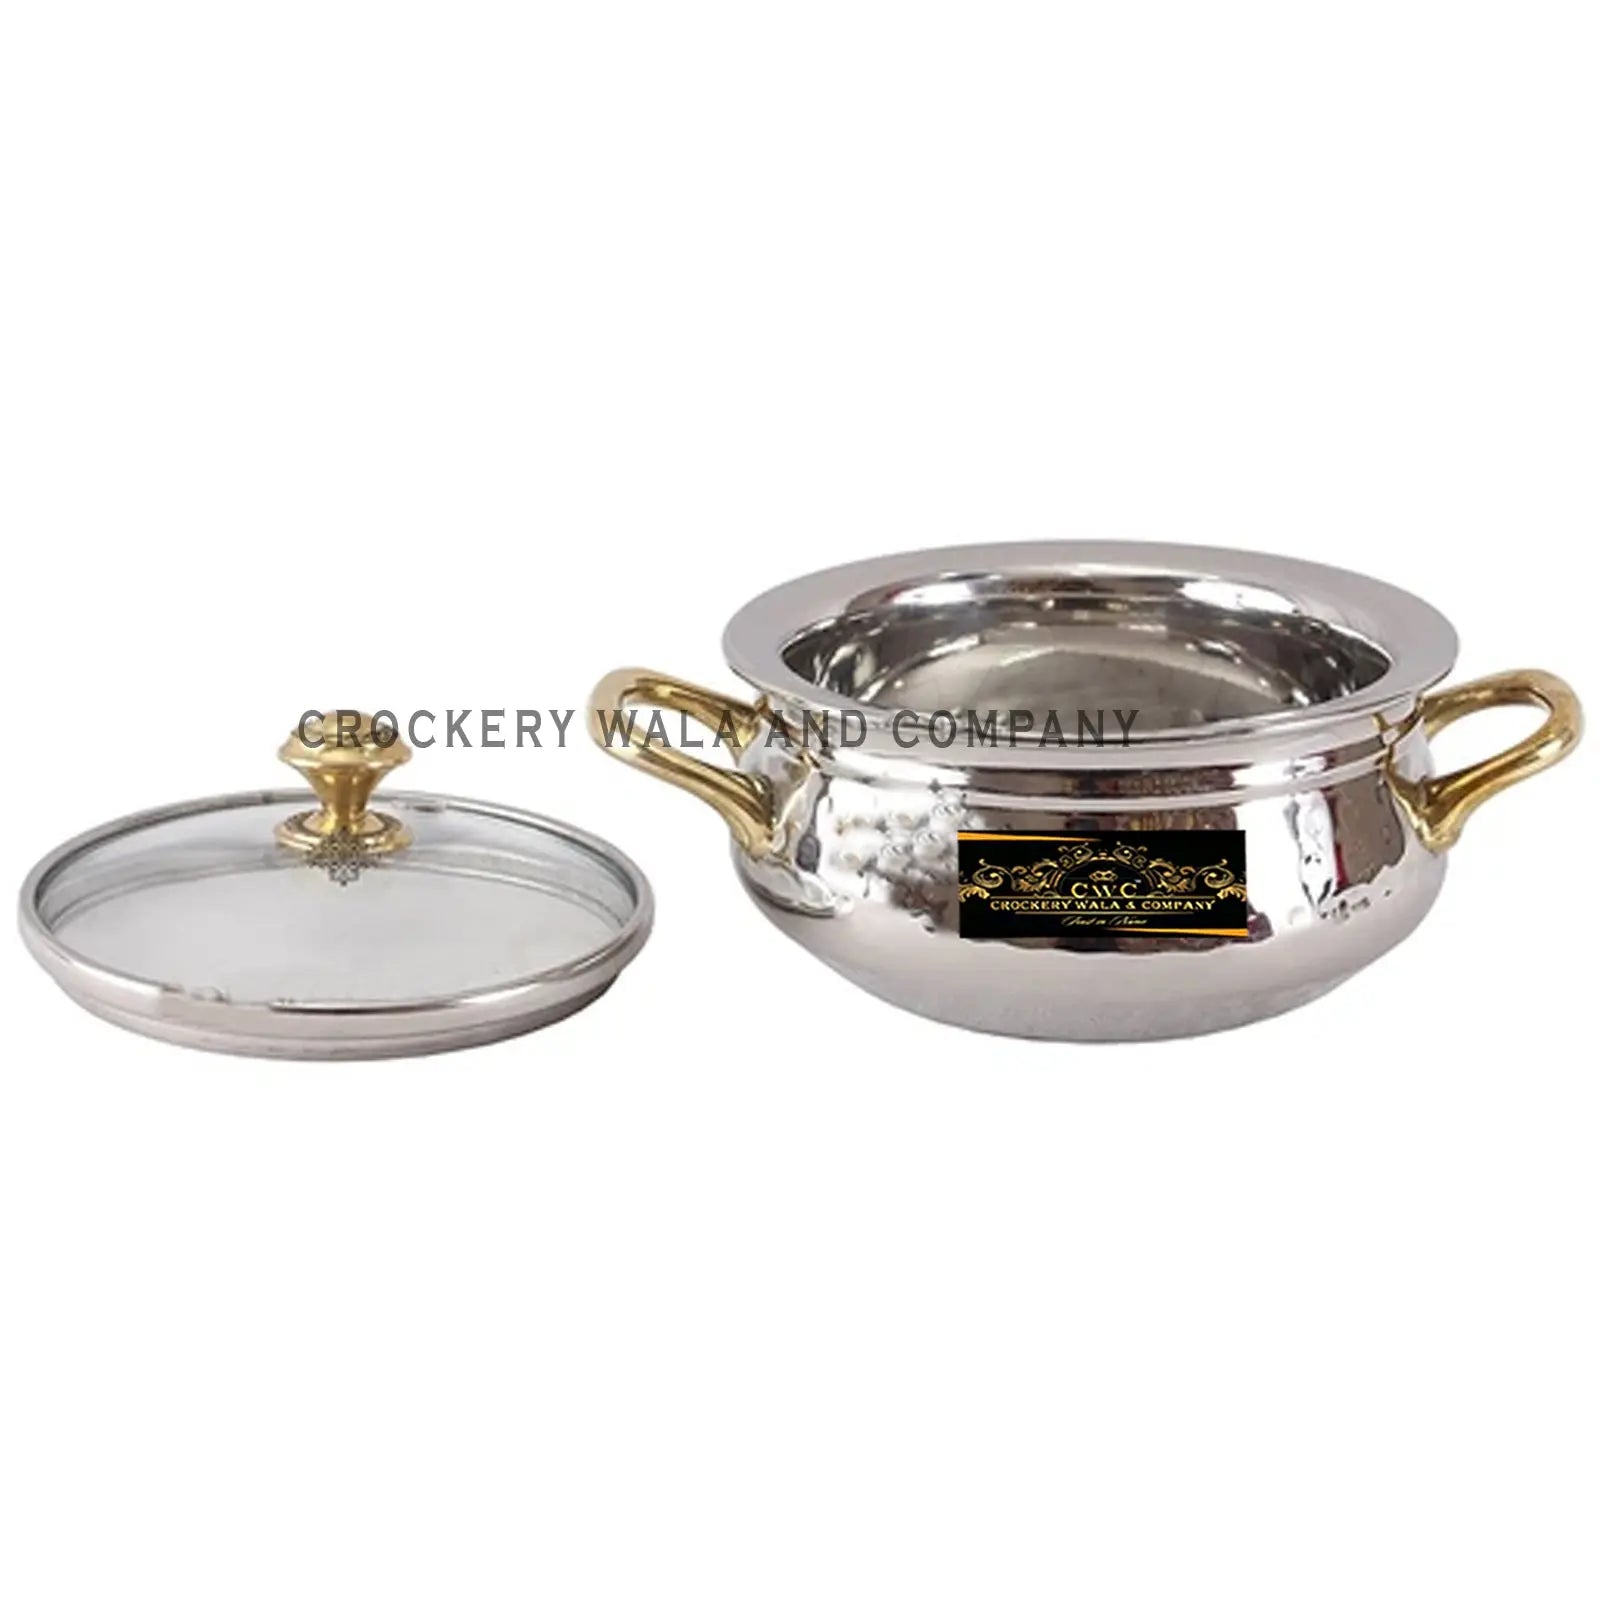 Crockery Wala And Company Steel Handi Hammered Stainless Steel Serving Handi With Glass Lid Brass Knob 350 ML - CROCKERY WALA AND COMPANY 